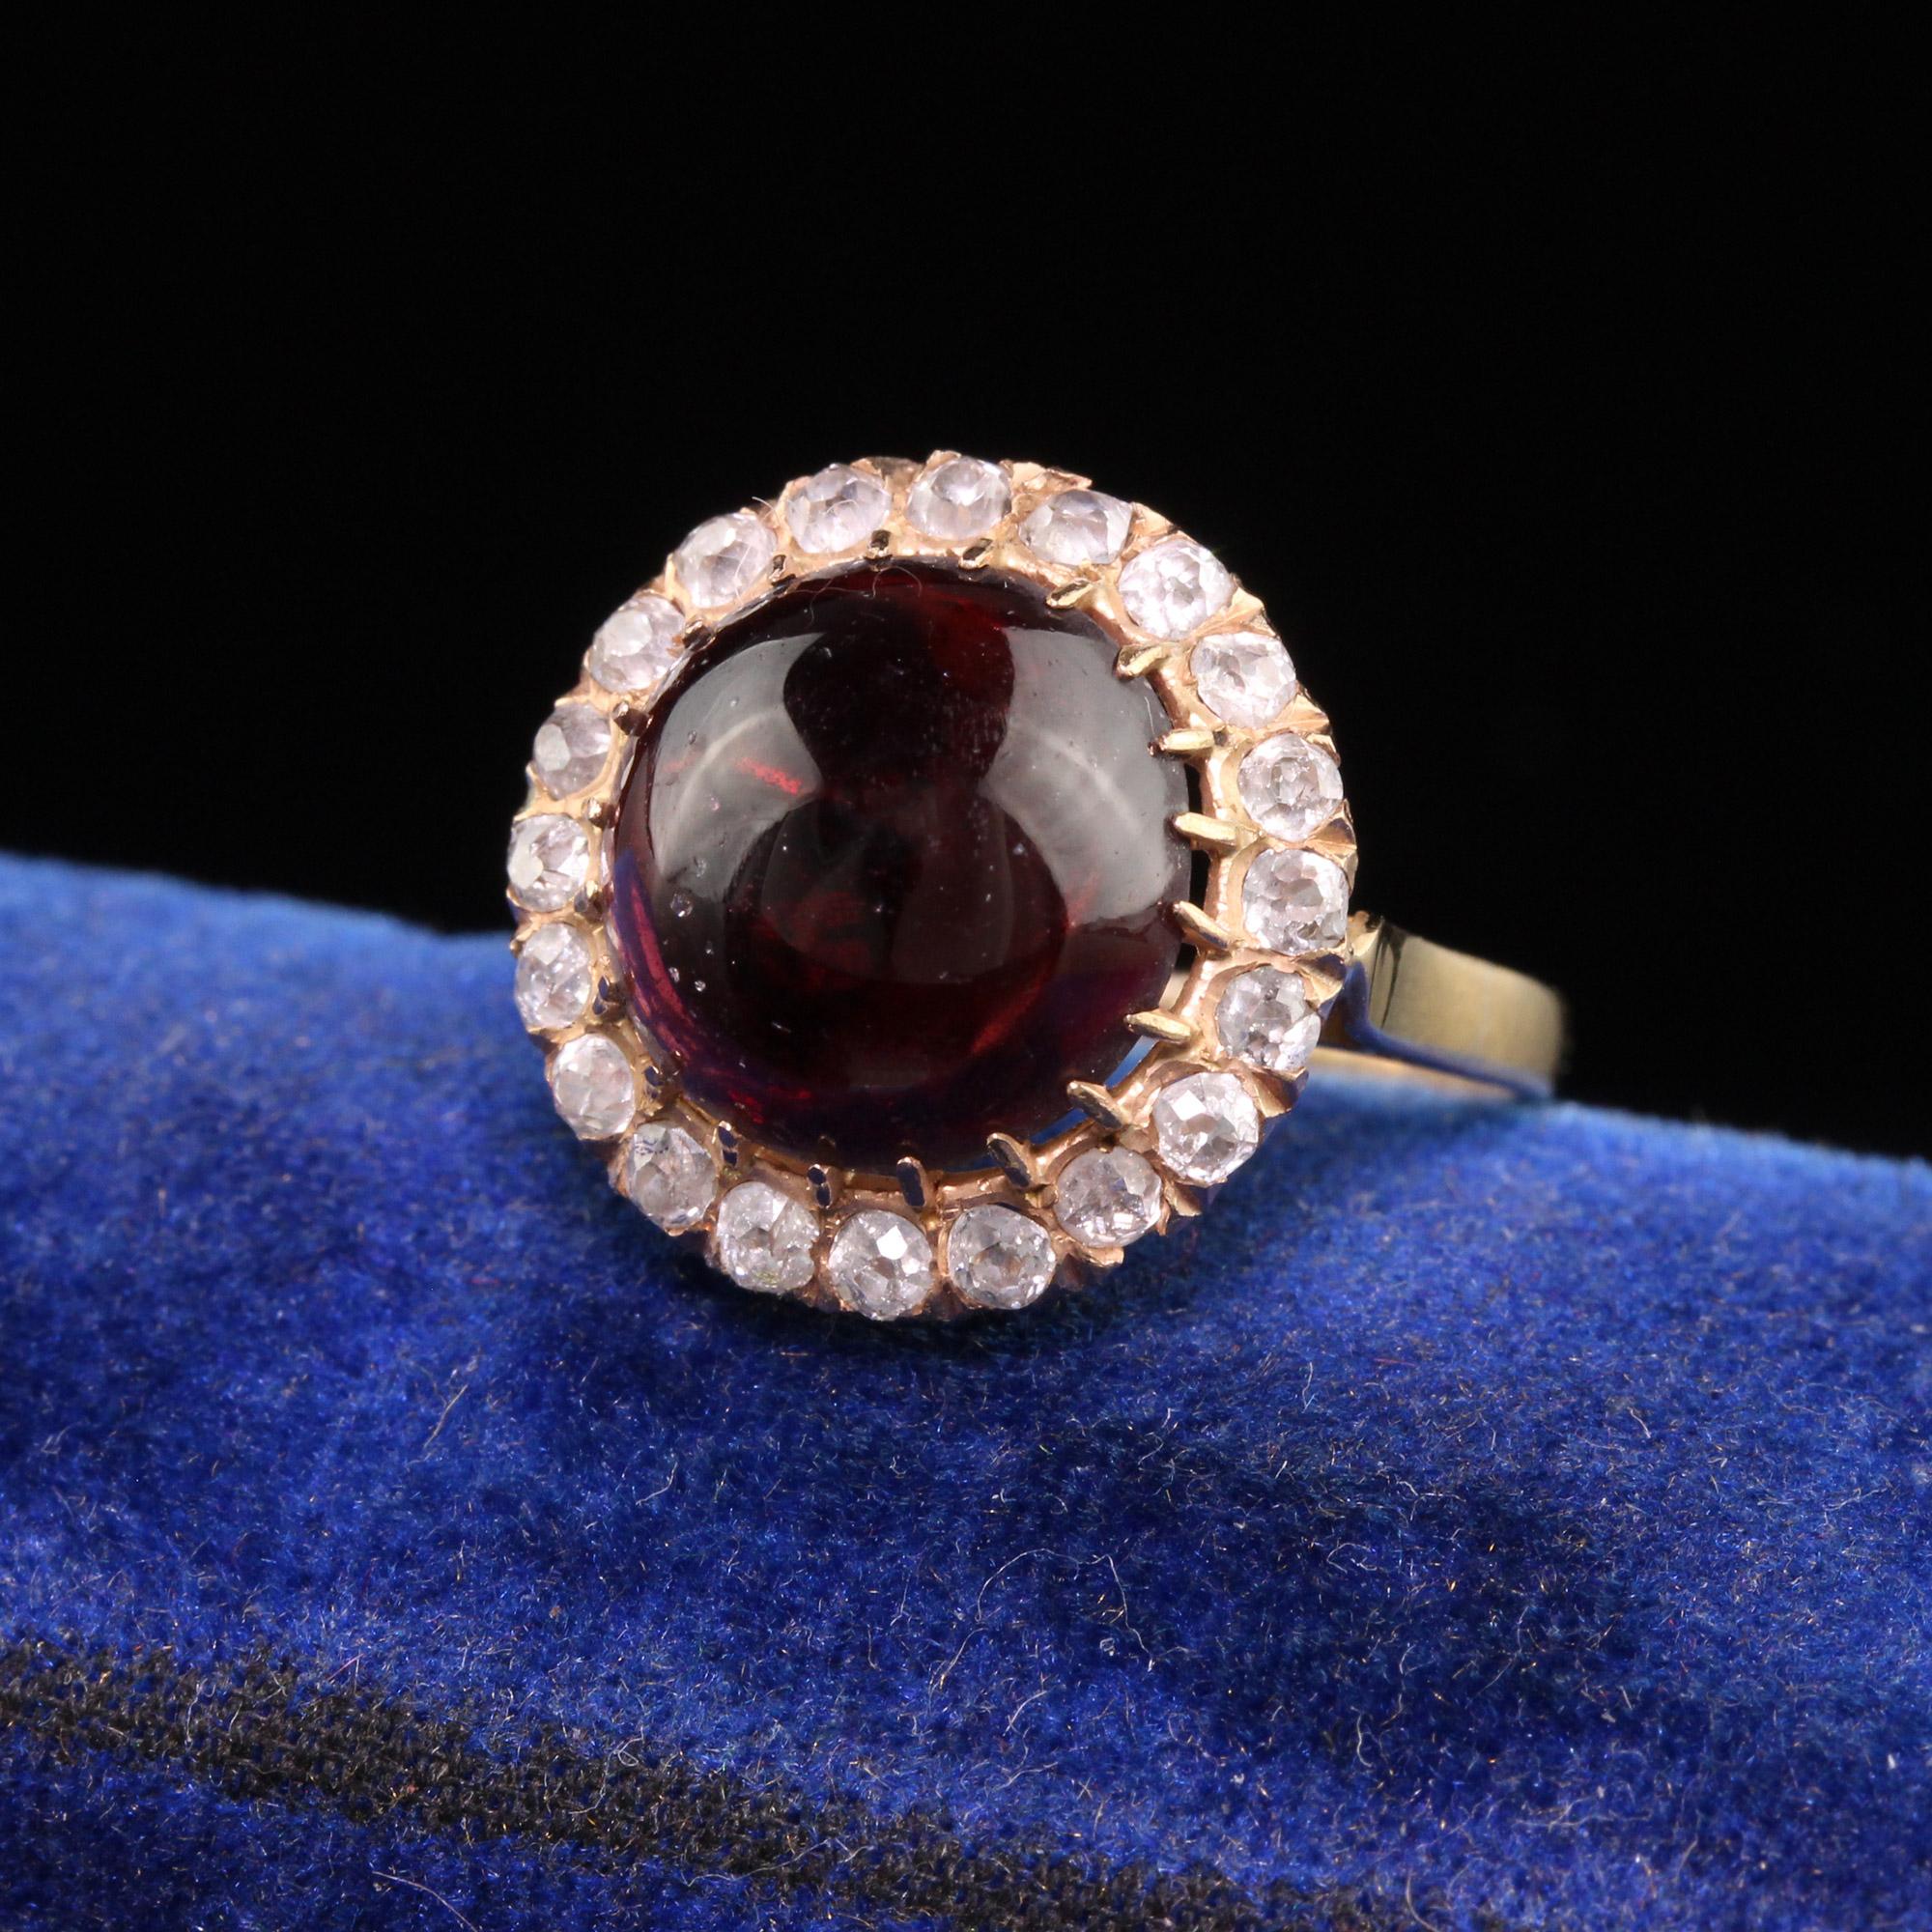 Beautiful Antique Victorian 18K Rose Gold Cabochon Garnet Old Mine Diamond Ring. This gorgeous ring is crafted in 18k rose gold. The center holds a large purple cabochon garnet and it is surrounded by old mine cut diamonds. The ring has a beautiful